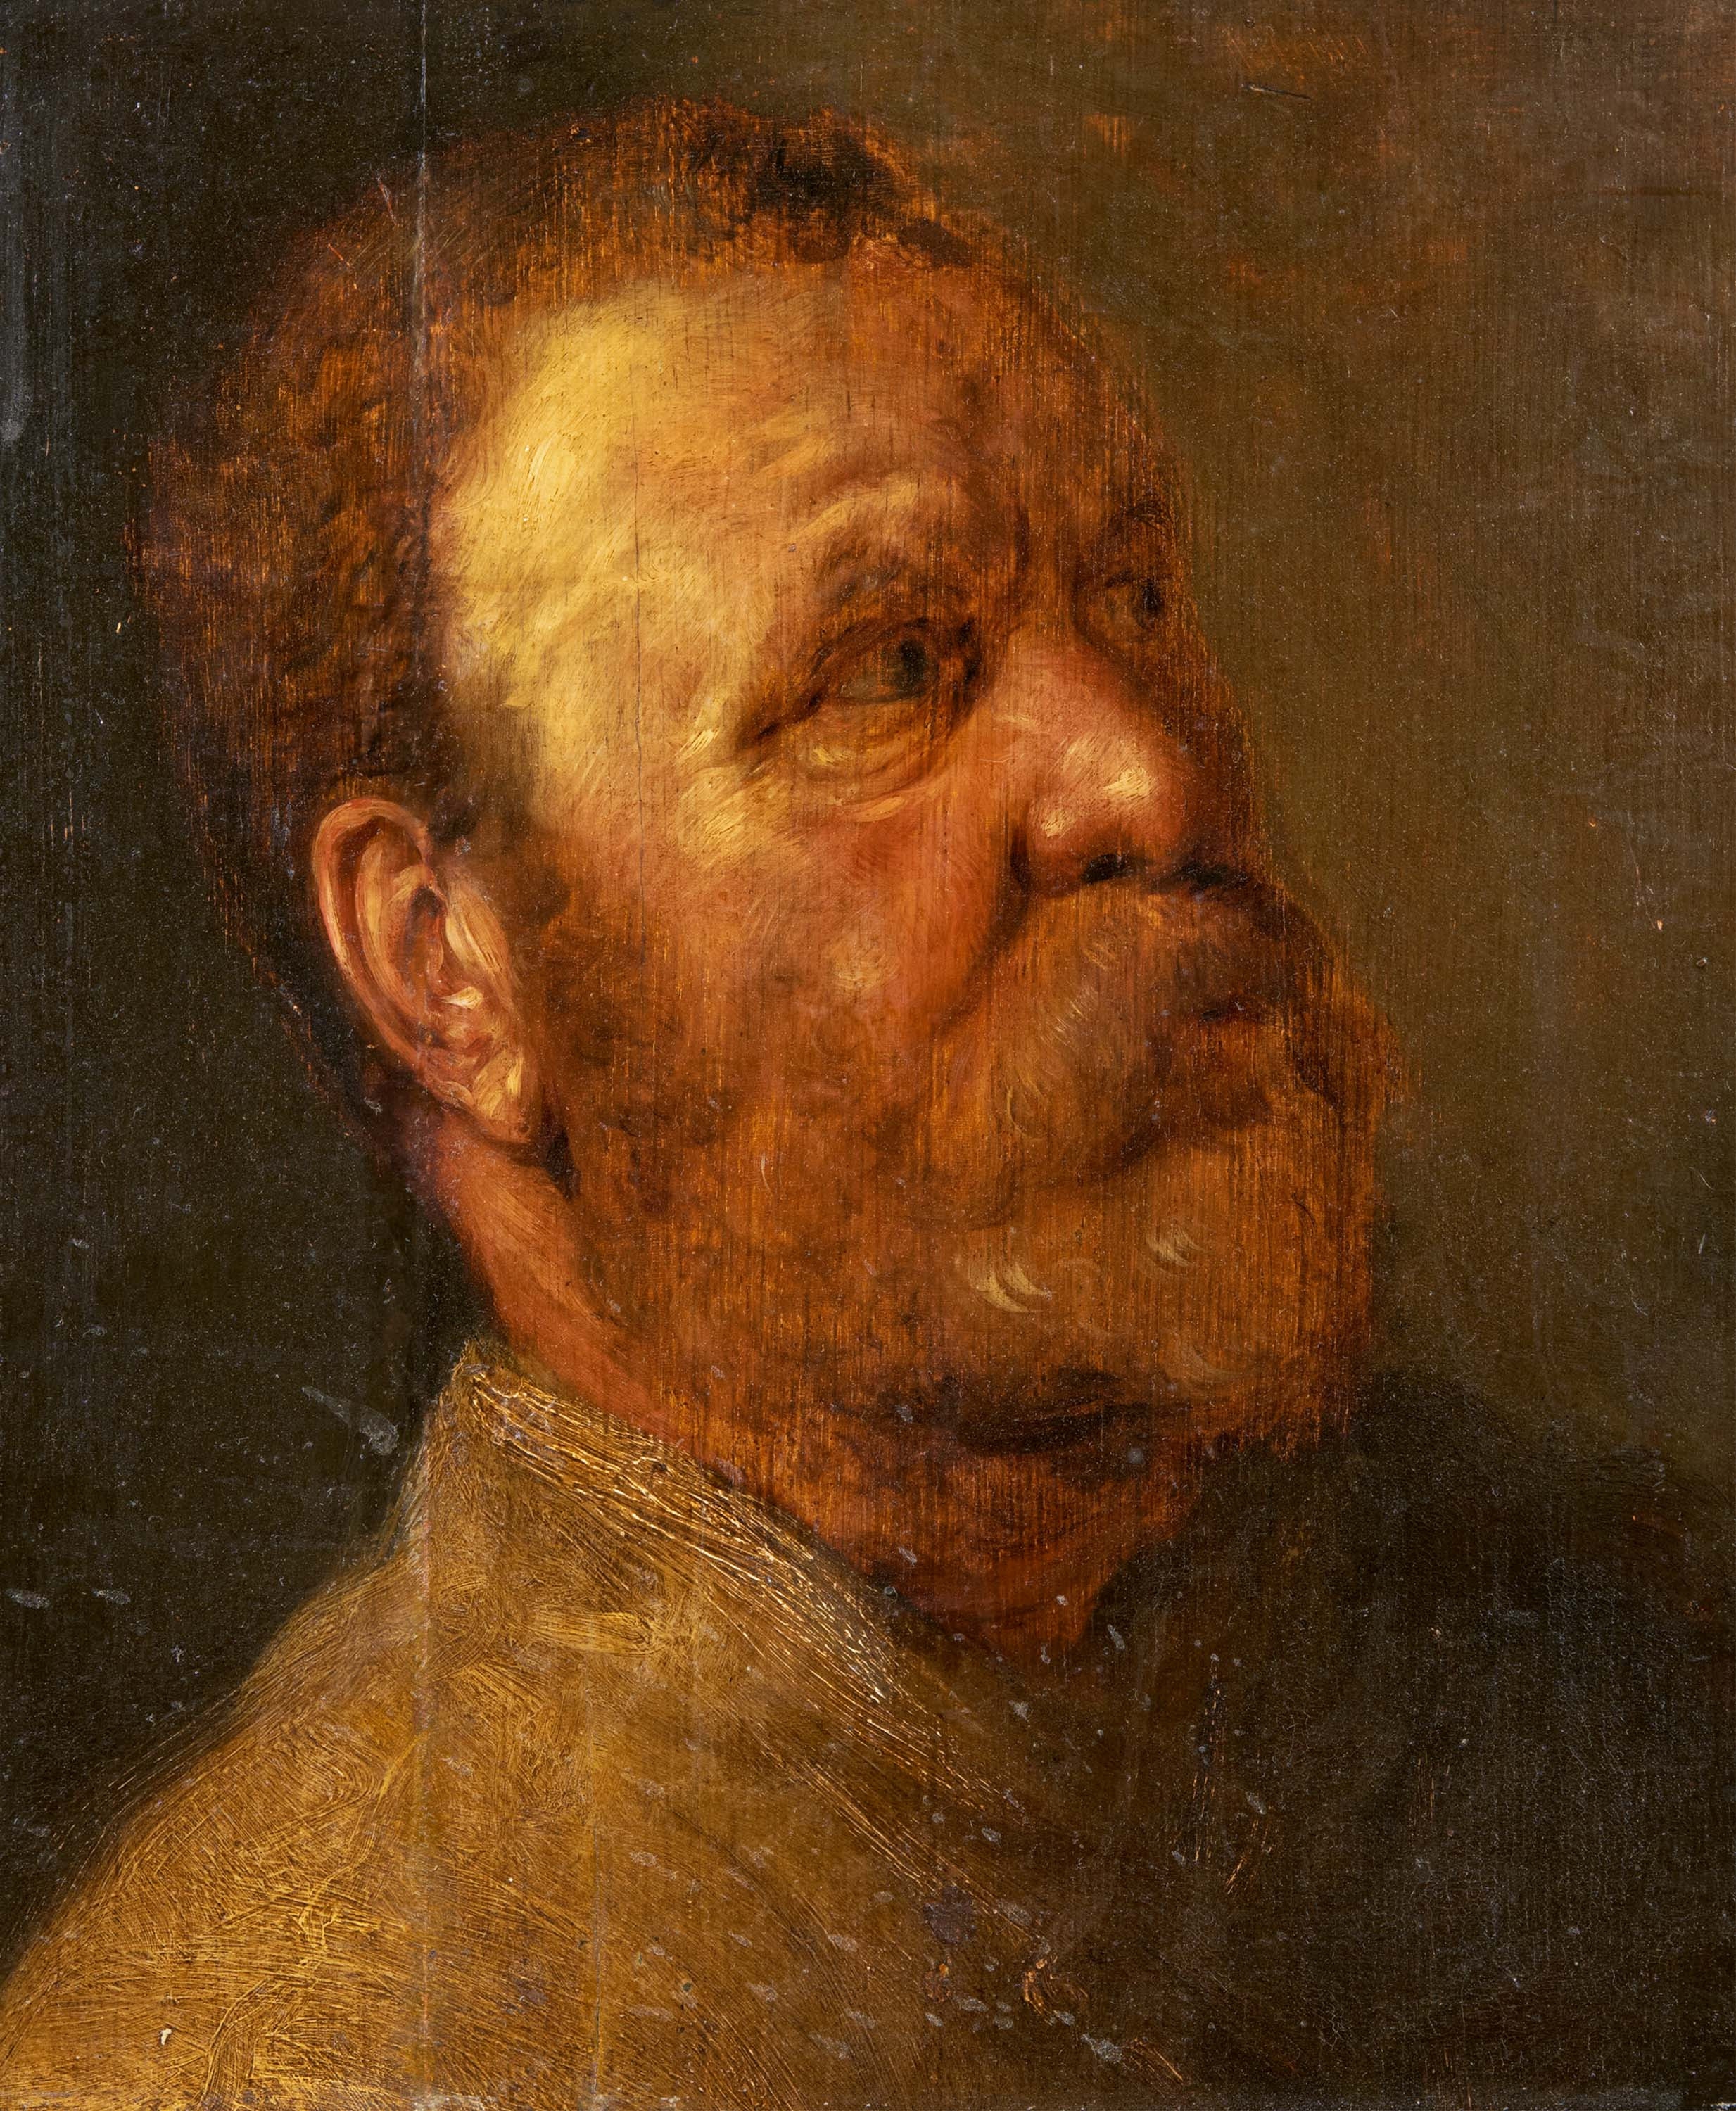 Artwork by Jan Lievens, Portrait of a Man., Made of Oil on wood